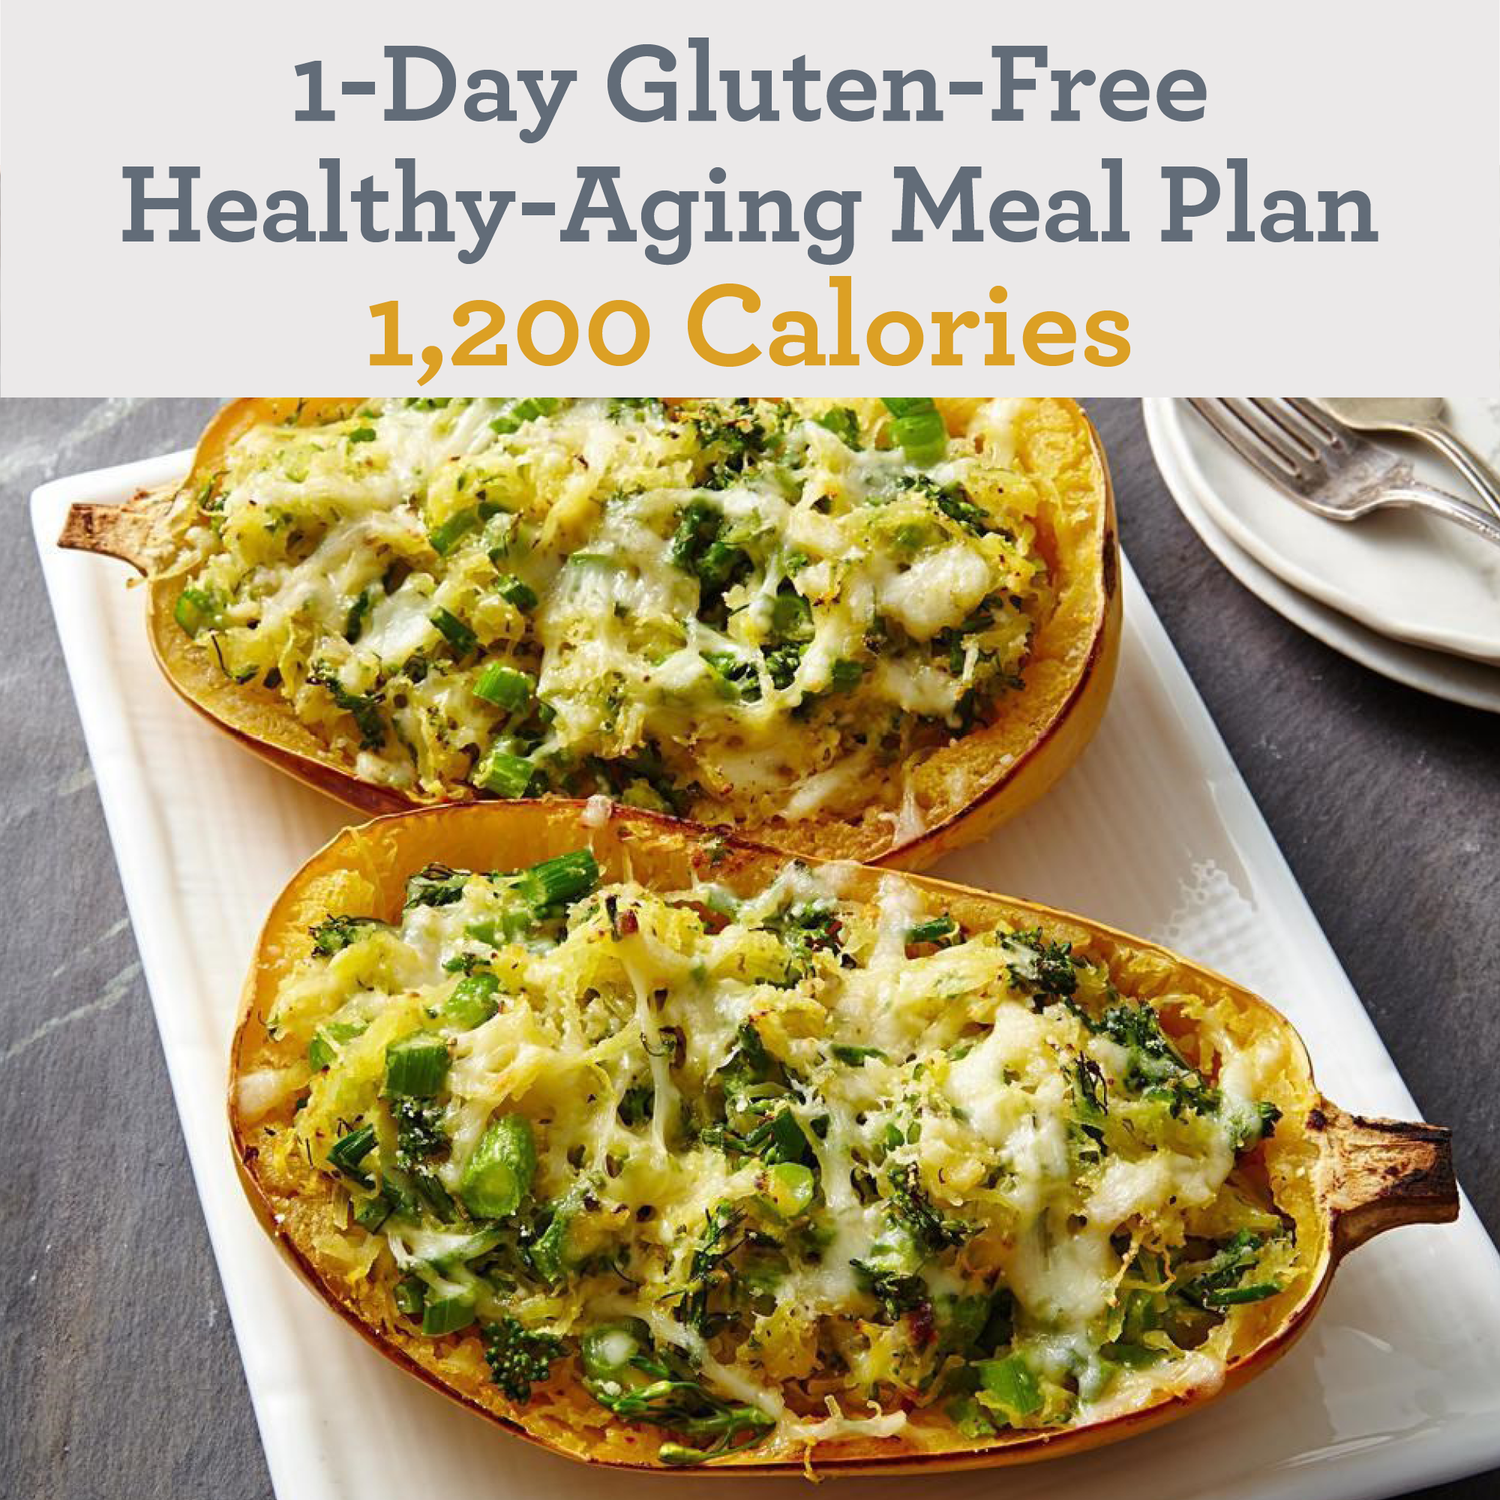 1-Day Gluten-Free Healthy-Aging Meal Plan: 1,200 Calories